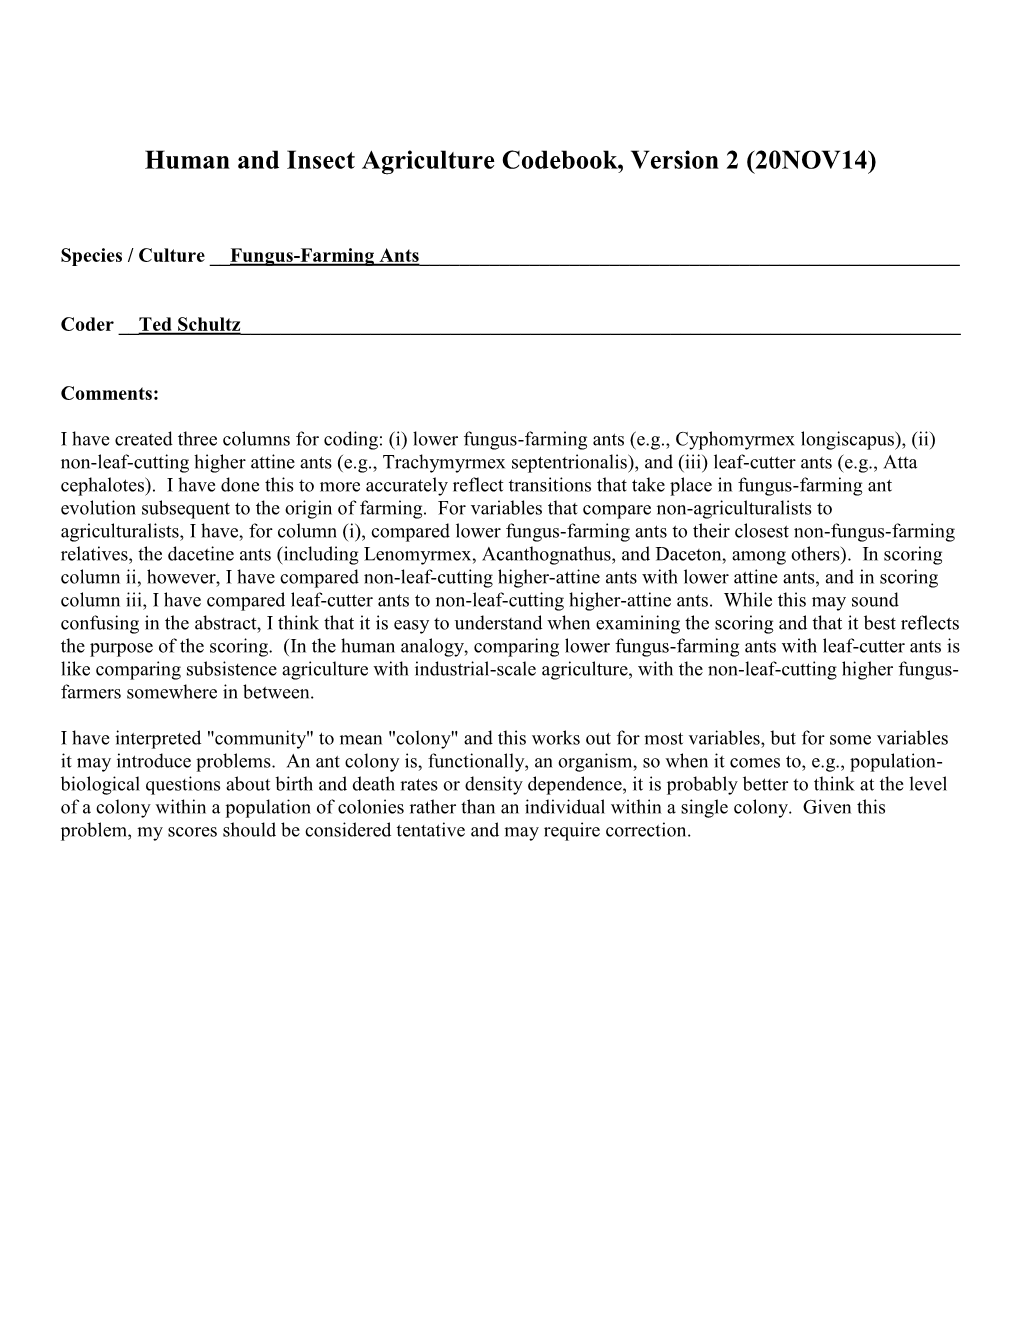 Human and Insect Agriculture Codebook, Version 2 (20NOV14)